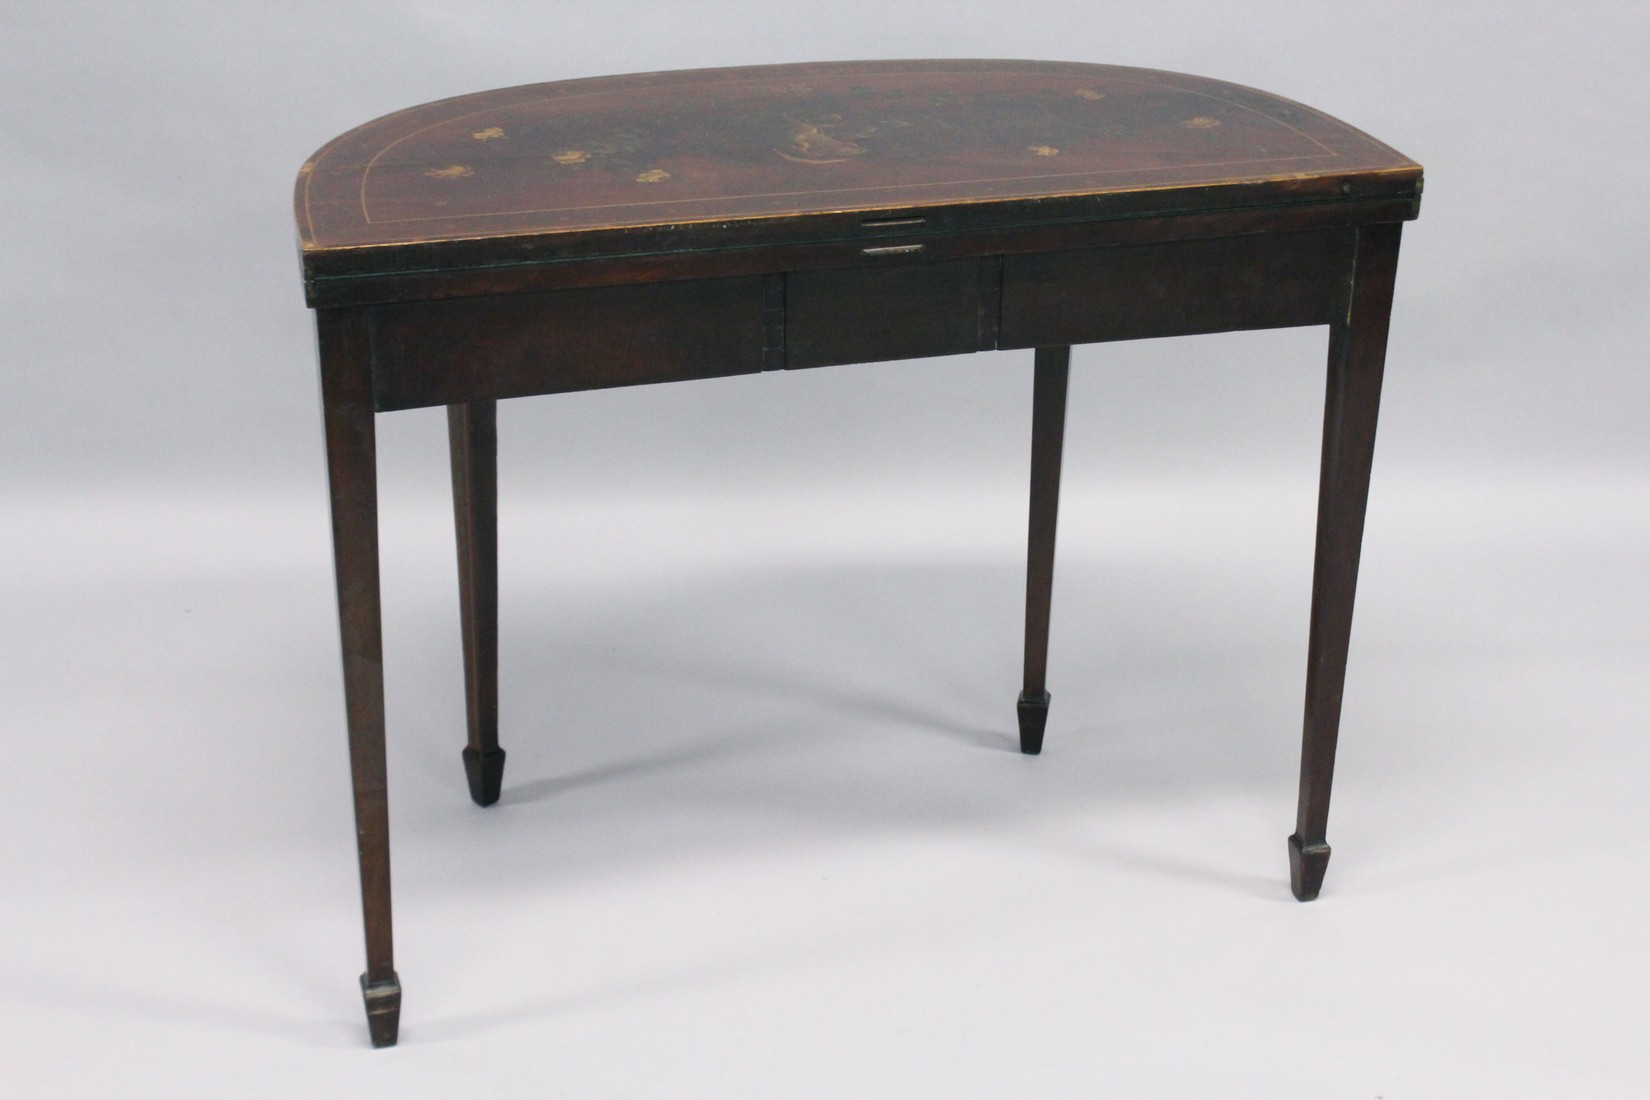 A GEORGIAN SHERATON REVIVAL MAHOGANY CARD TABLE painted with garlands and flowers with banded top - Image 6 of 8